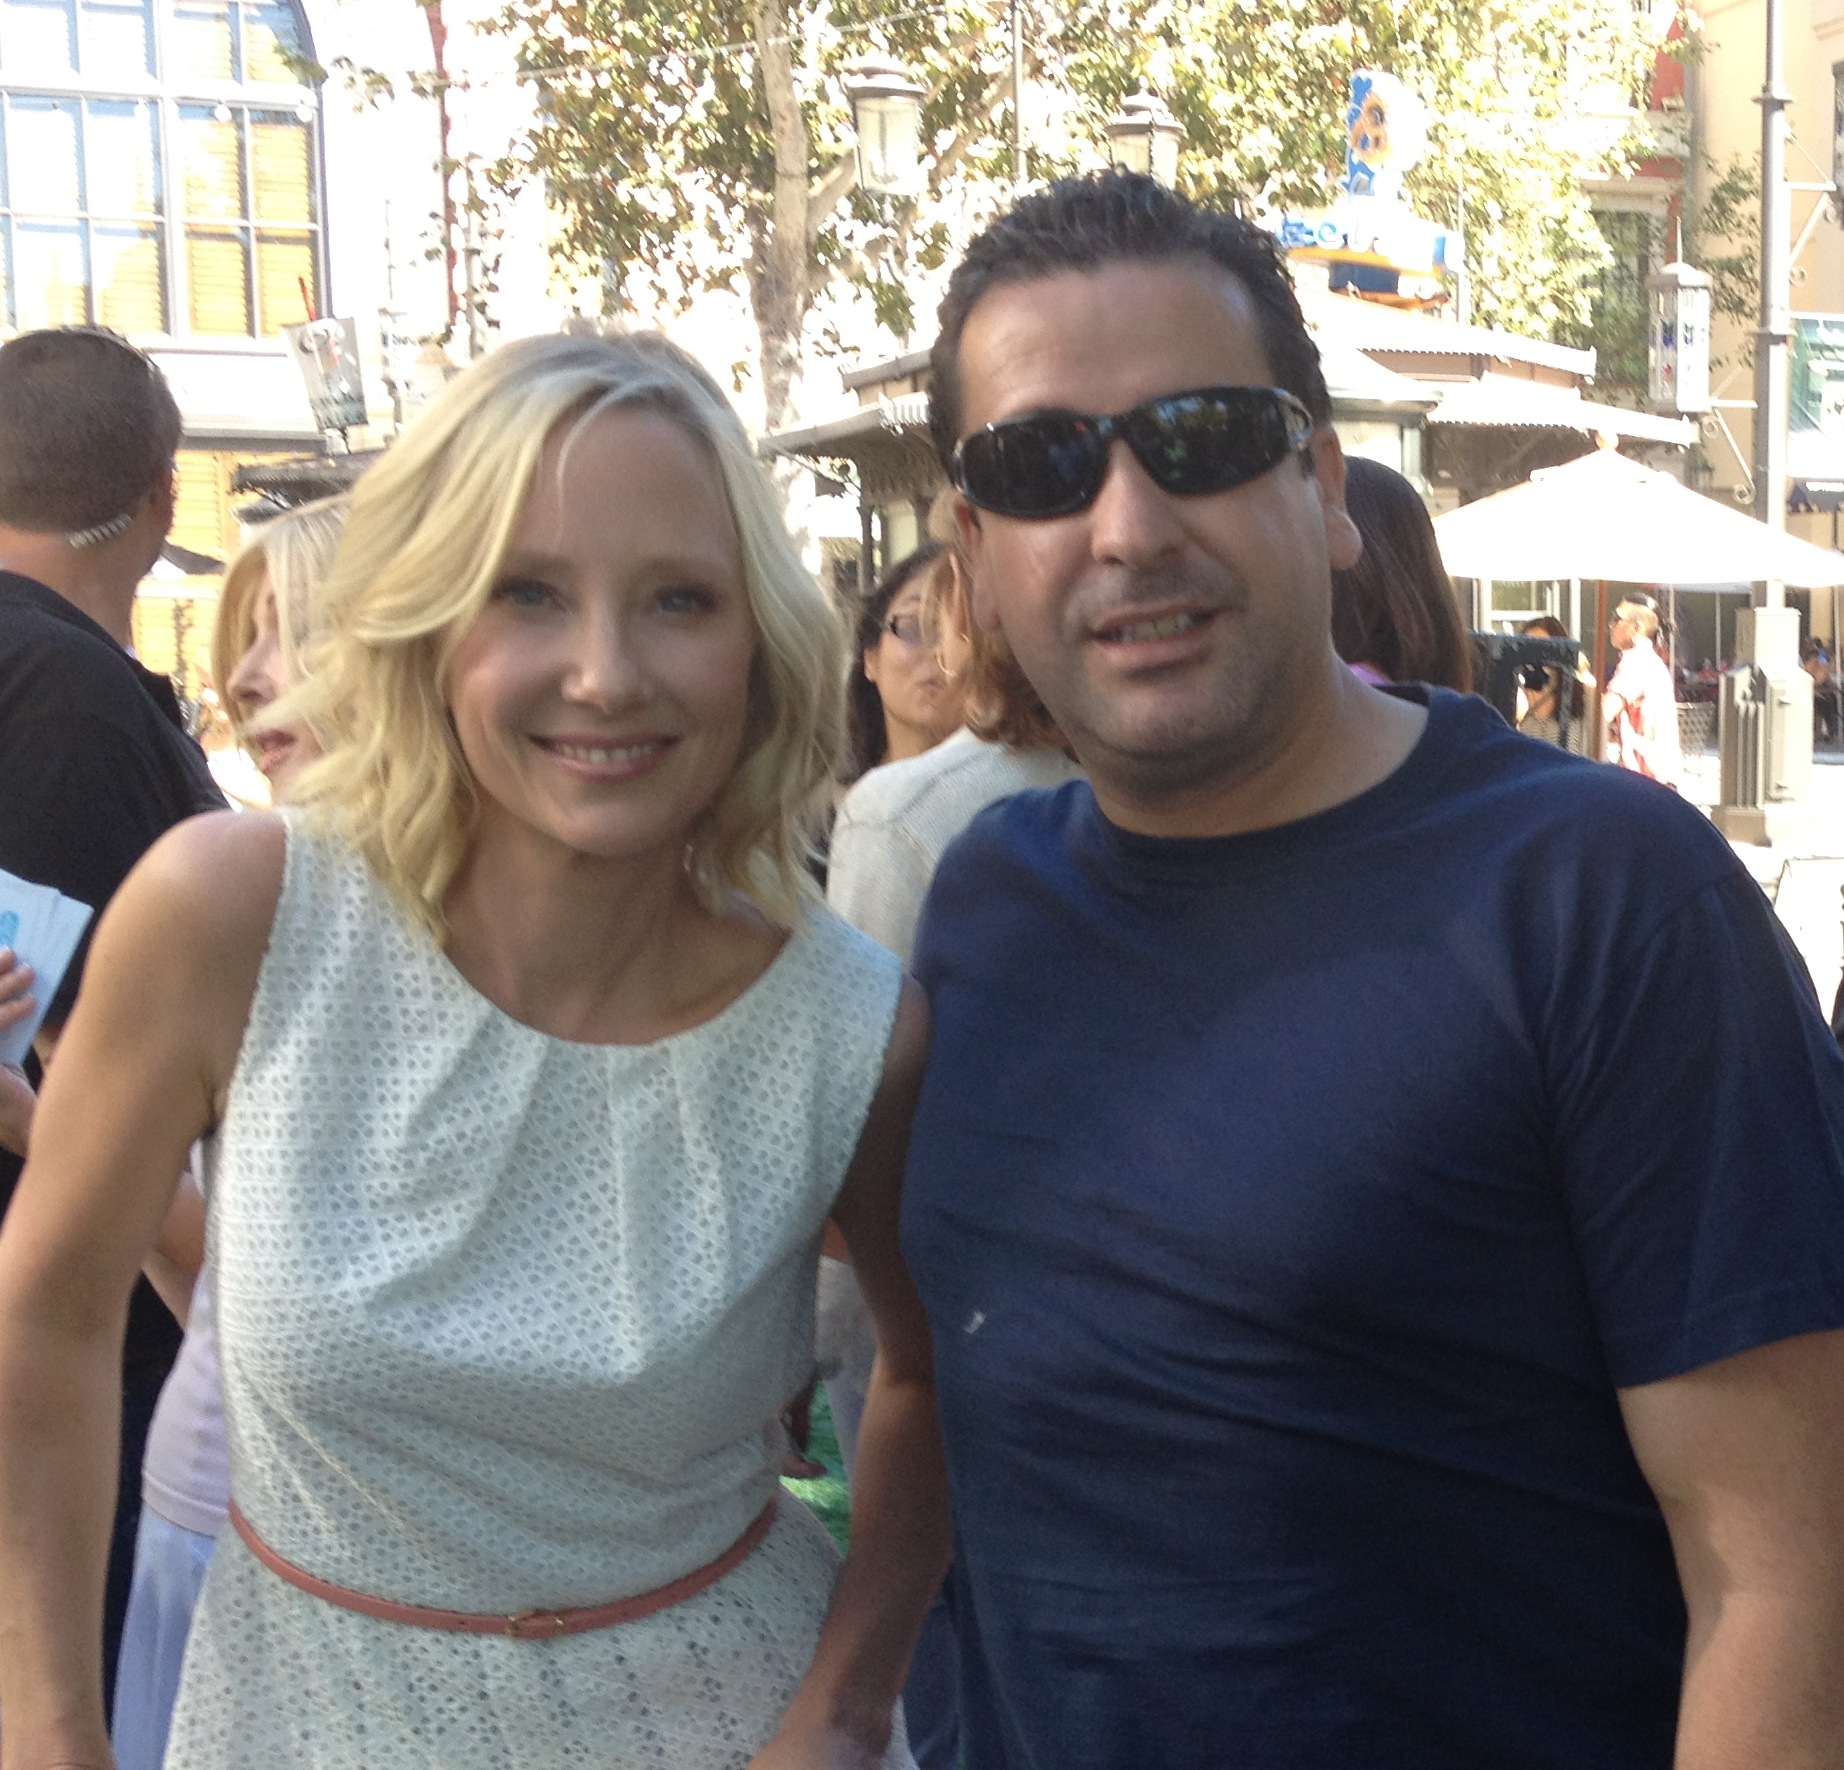 With Friend Anne Heche Launching of product